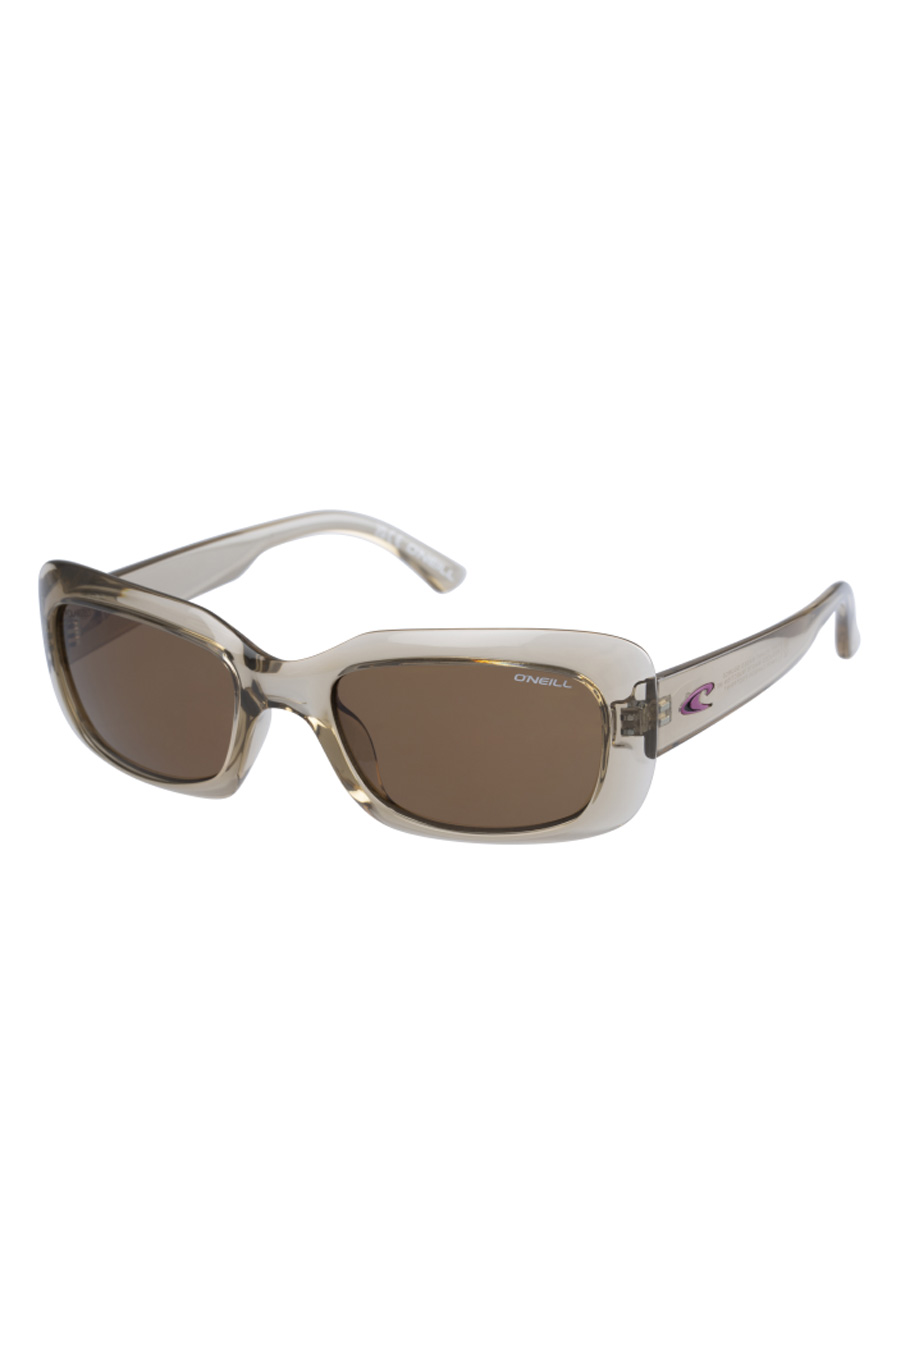 Saulesbrilles ONEILL ONS-9012-20-100P